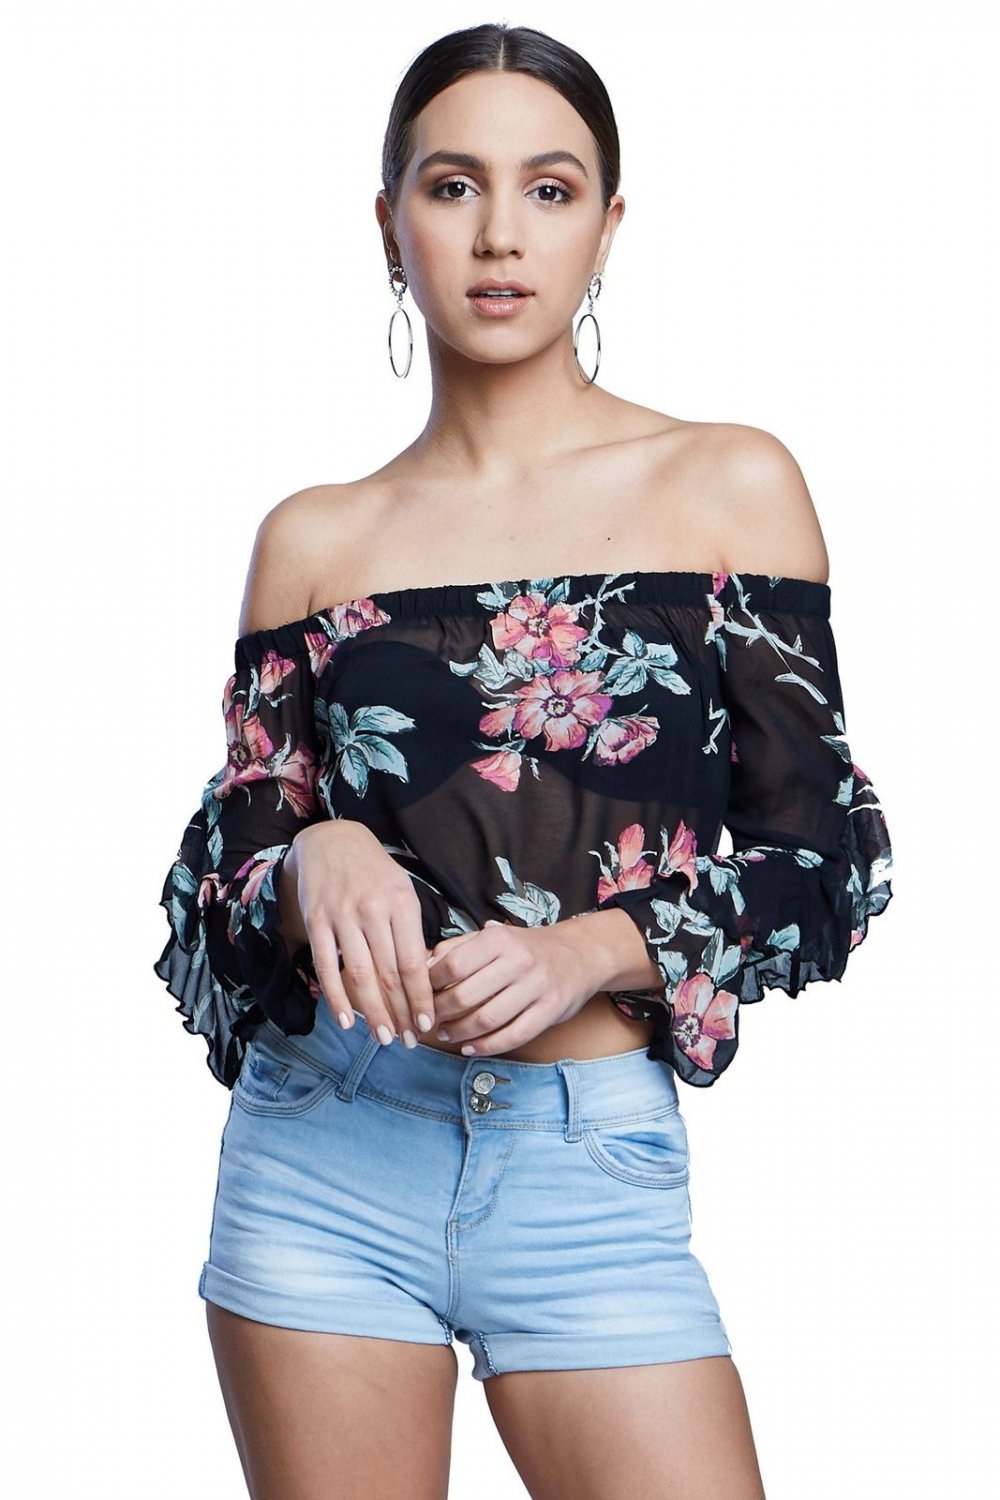 So Shy Off-the-Shoulder See-Through Floral Crop Top